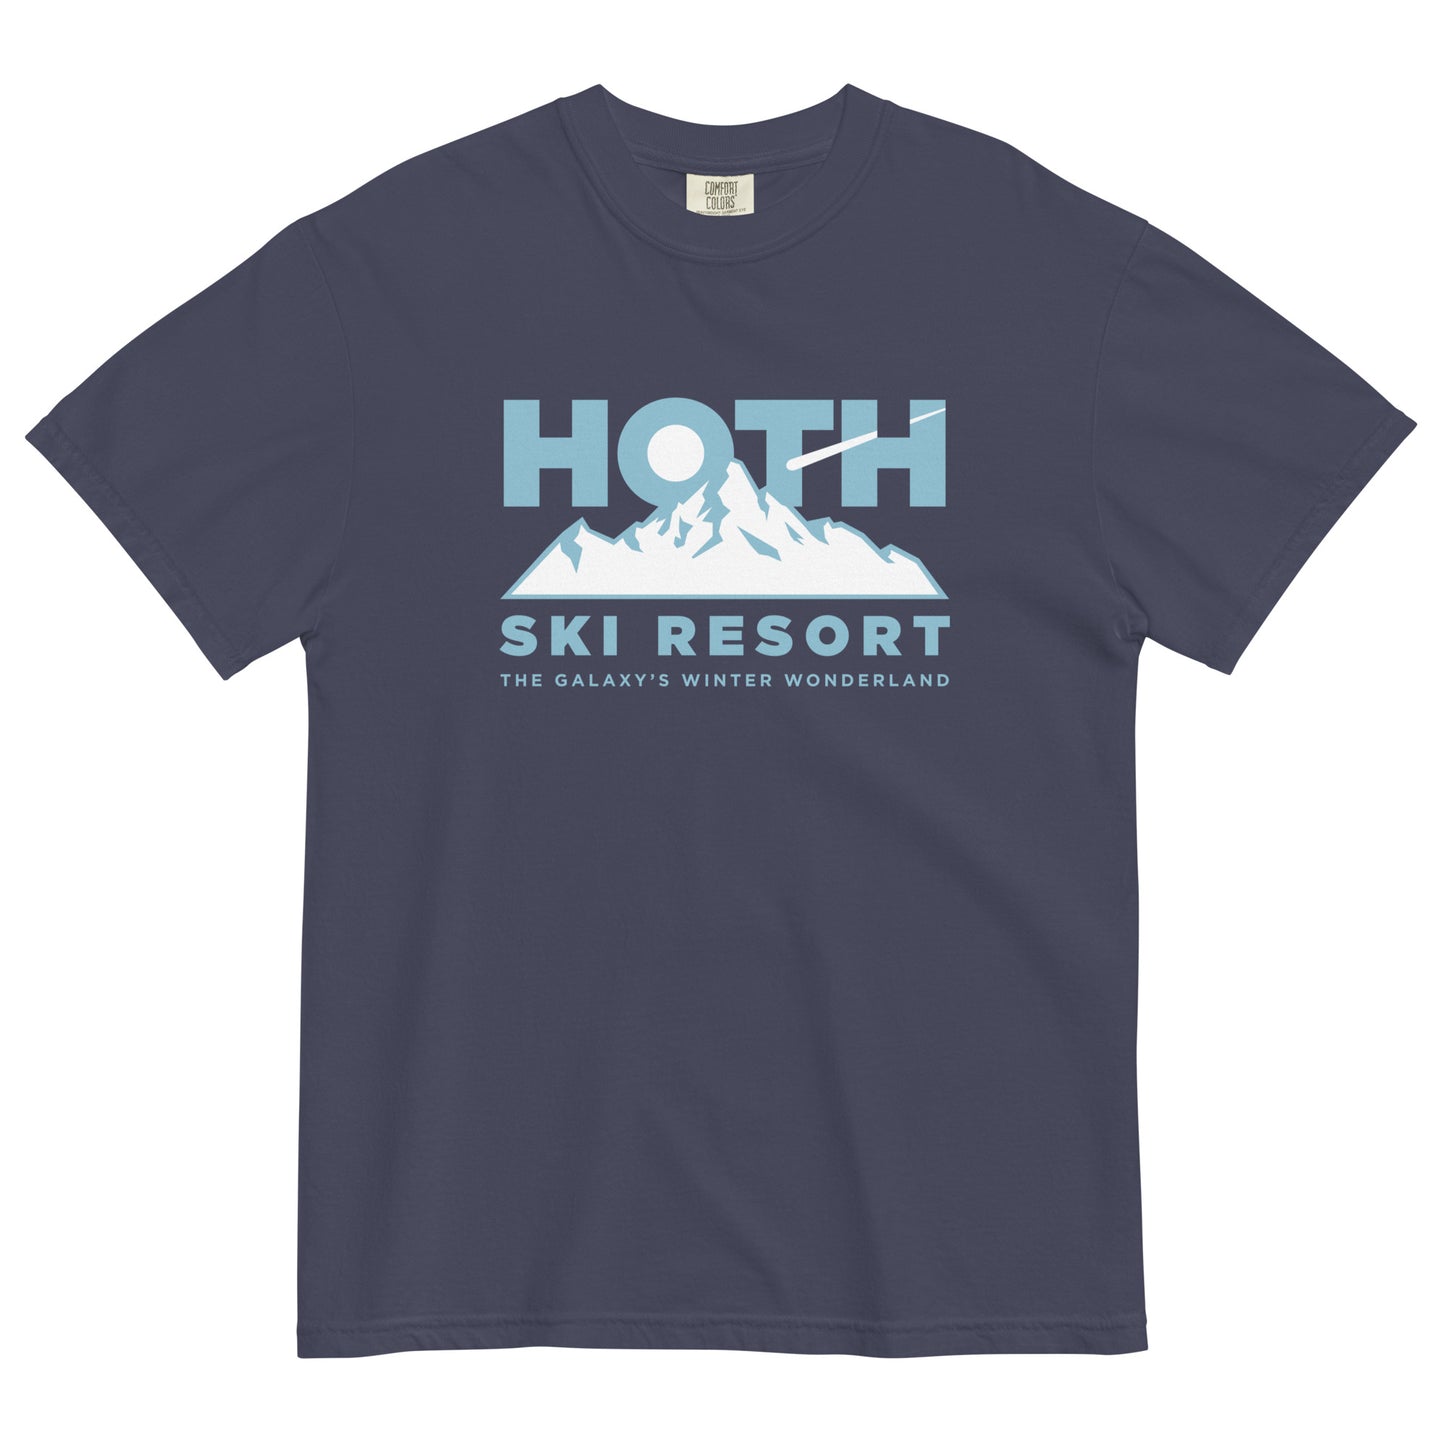 Hoth Ski Resort Men's Relaxed Fit Tee